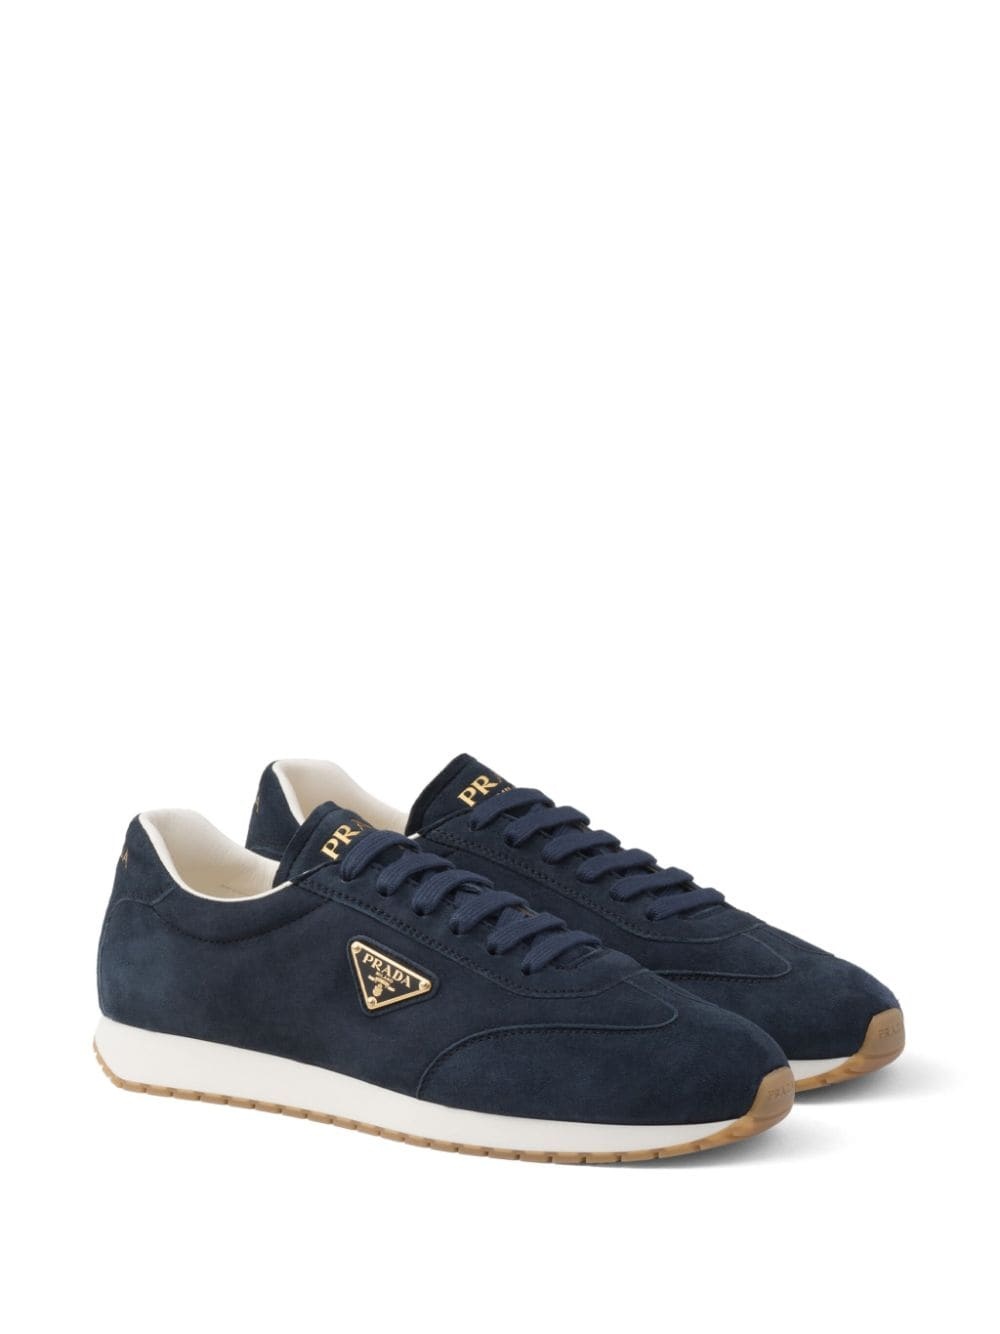 triangle-logo suede sneakers - 2